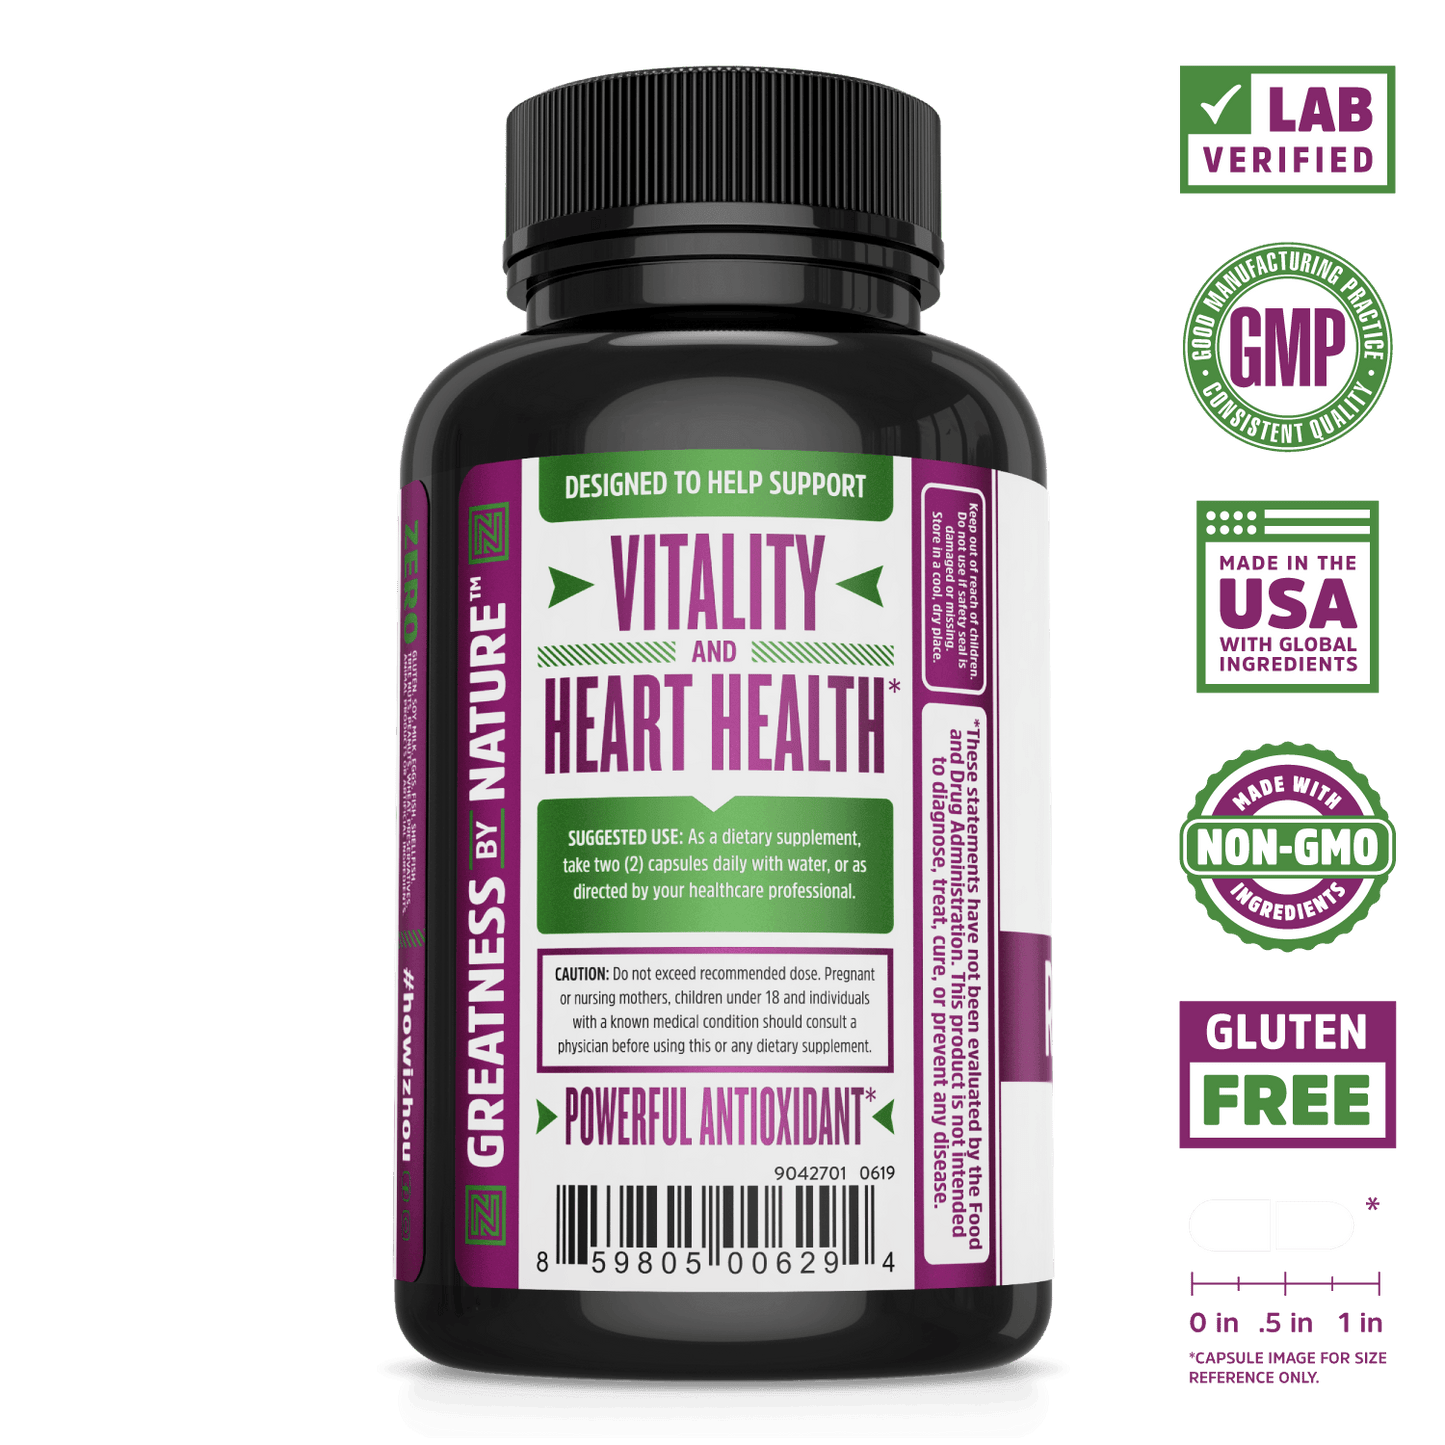 Zhou Nutrition Resveratrol Immune System Supplement. Lab verified, good manufacturing practices, made in the USA with global ingredients, made with non-GMO ingredients, gluten free